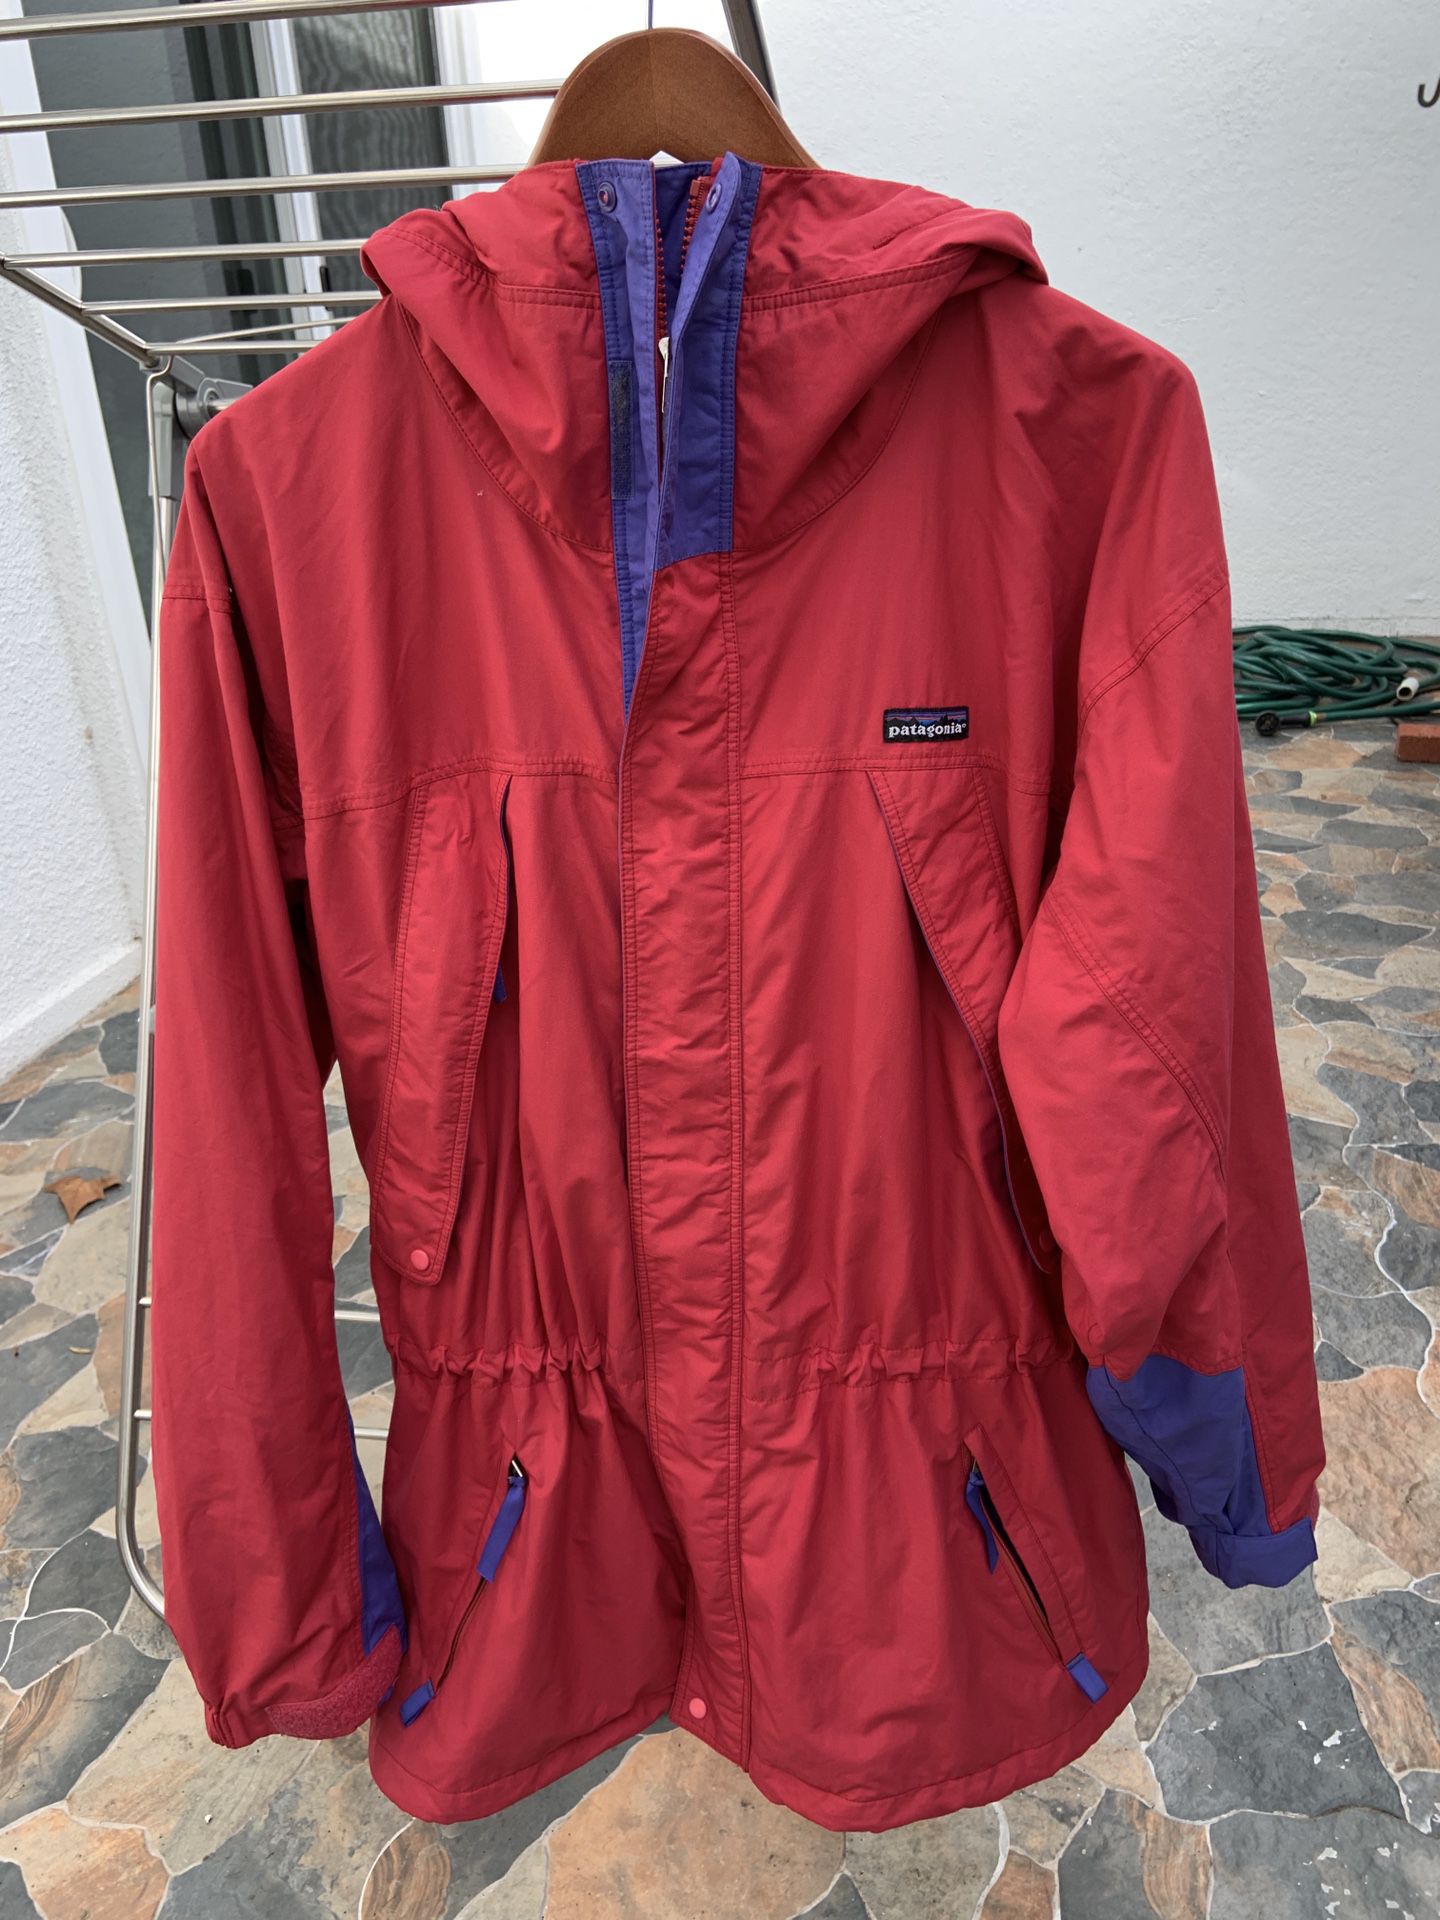  Patagonia Mens Parka Shell In Large Red